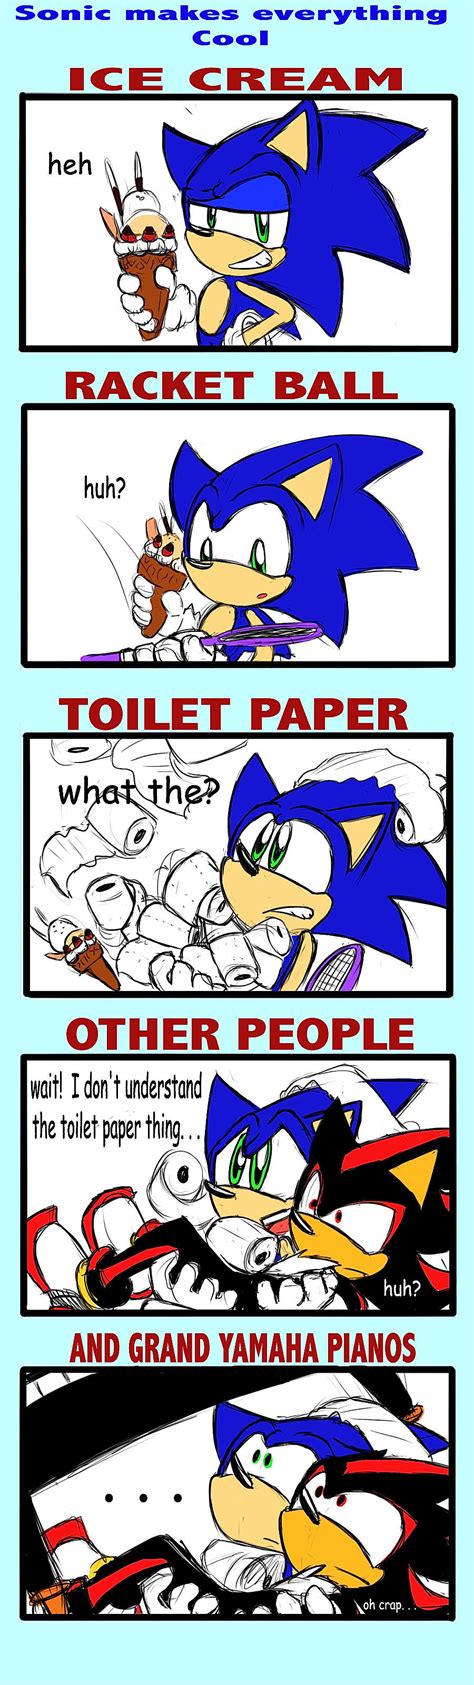 The Werehog Sonic The Hedgehog Know Your Meme